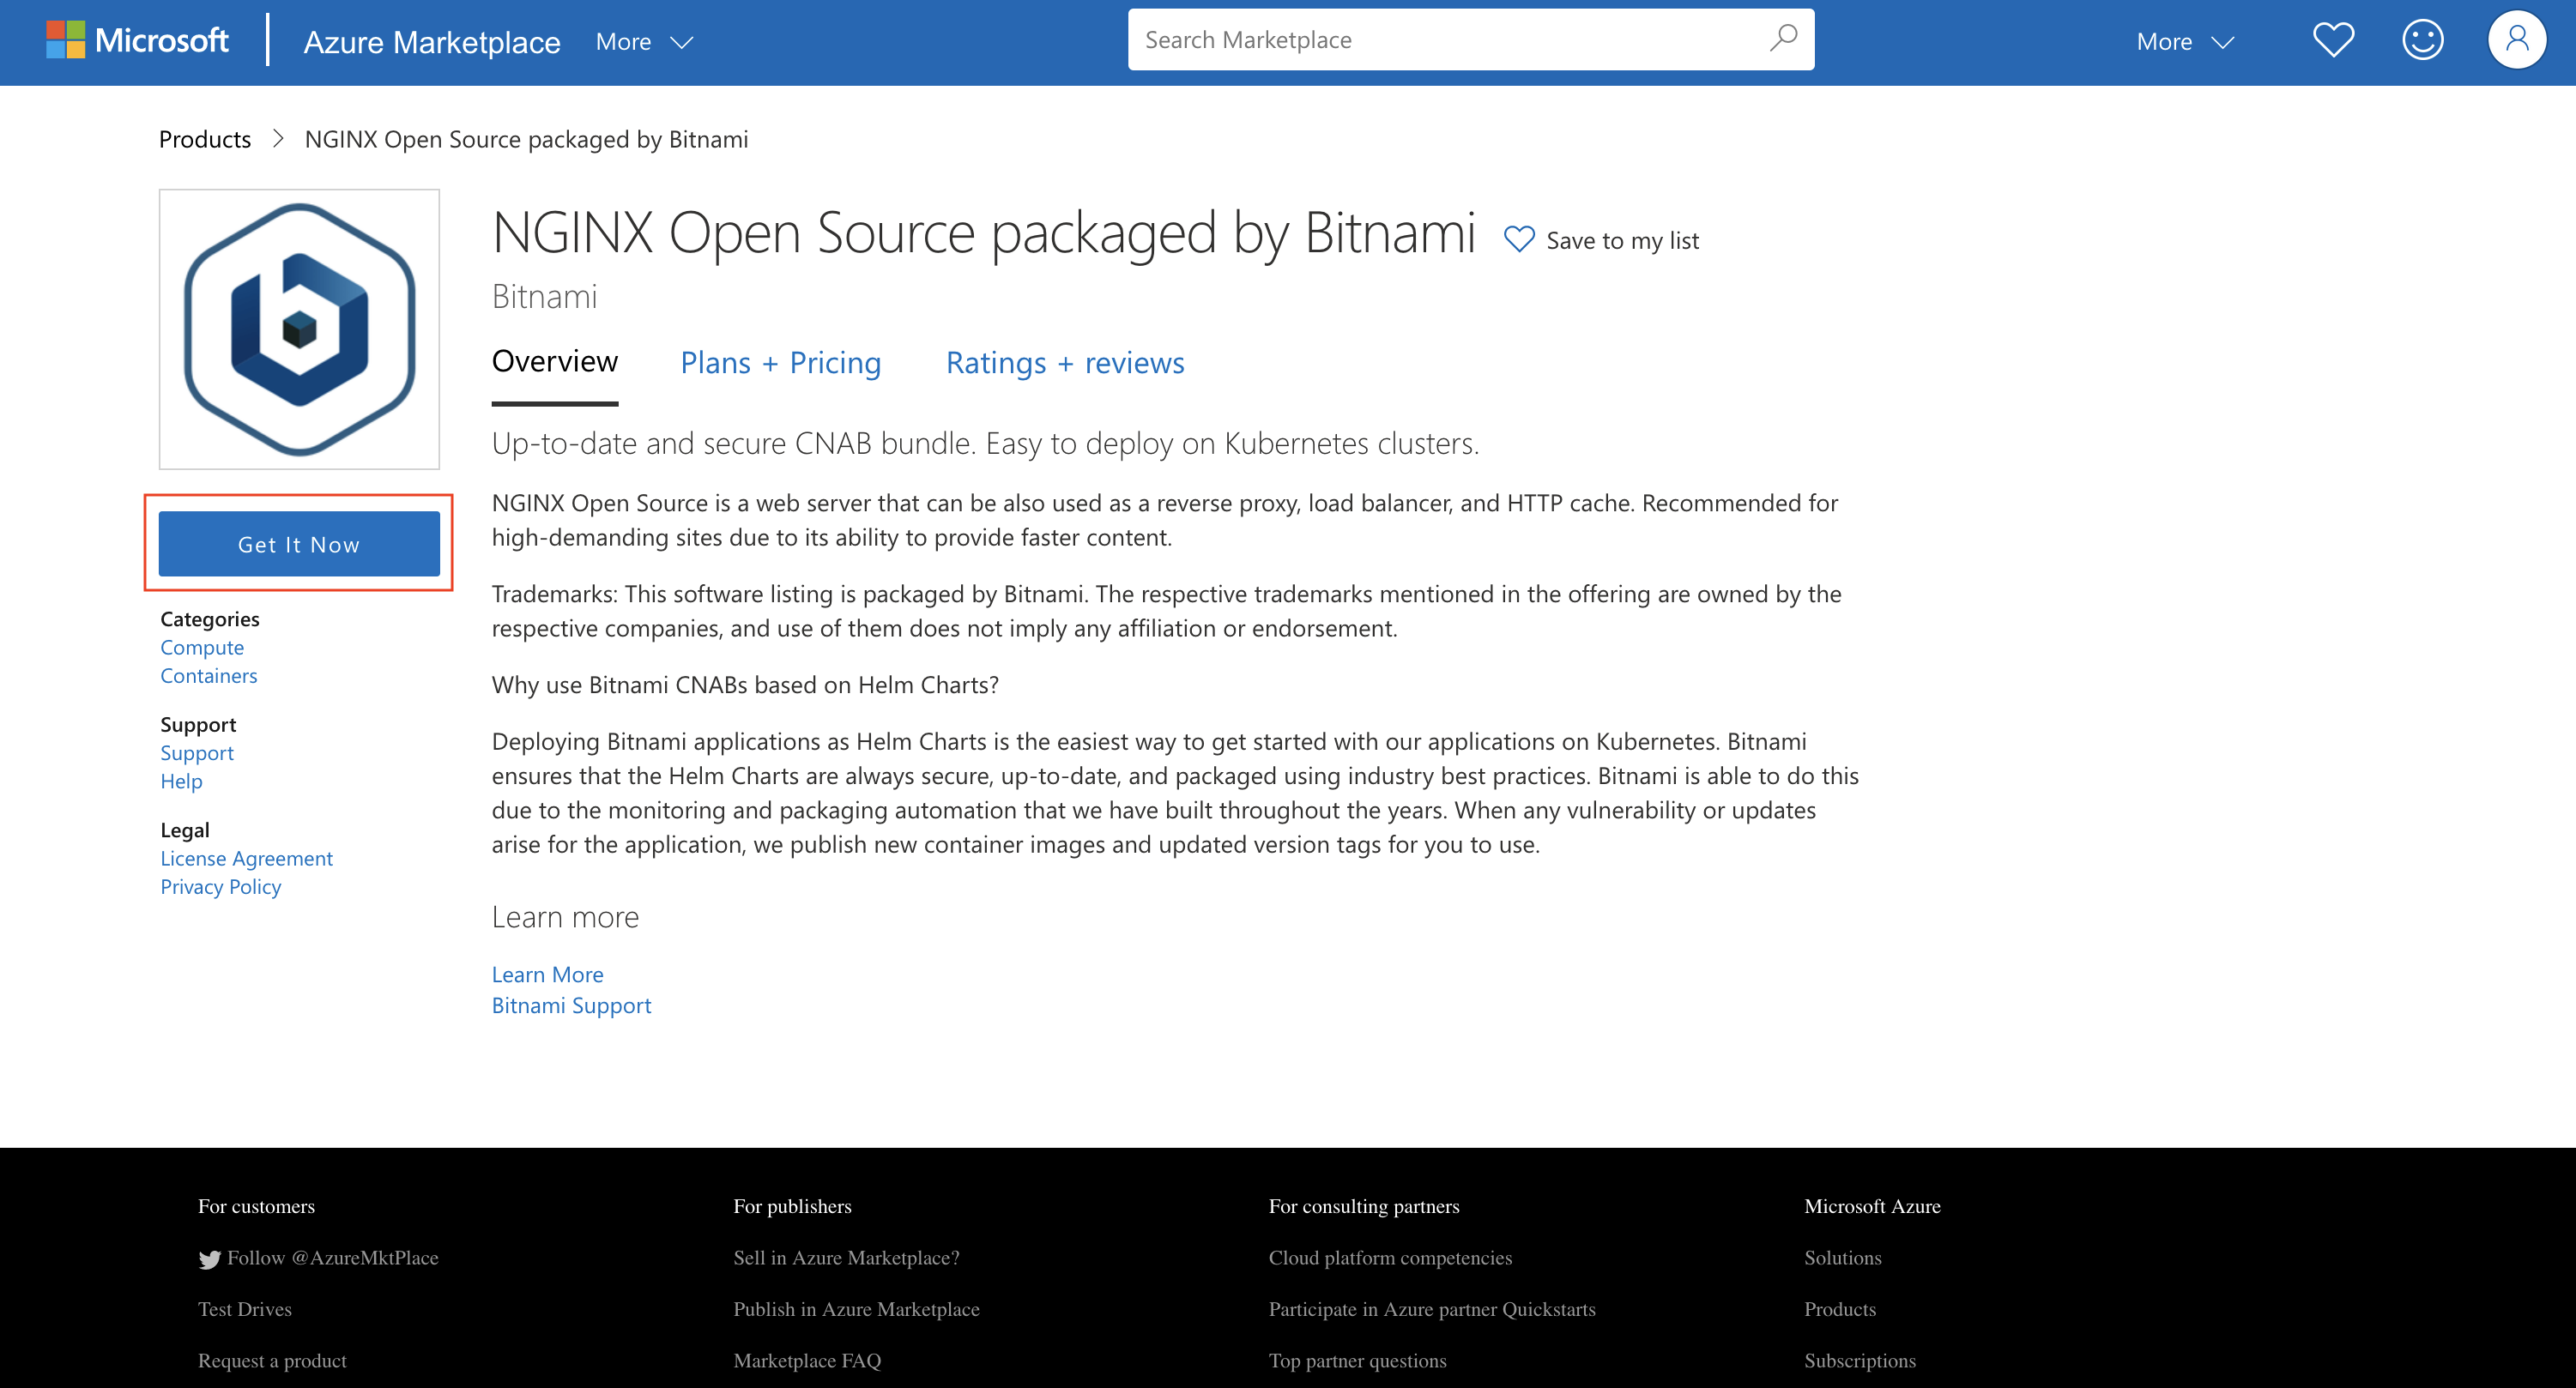 Review NGINX Open Source packaged by Bitnami information